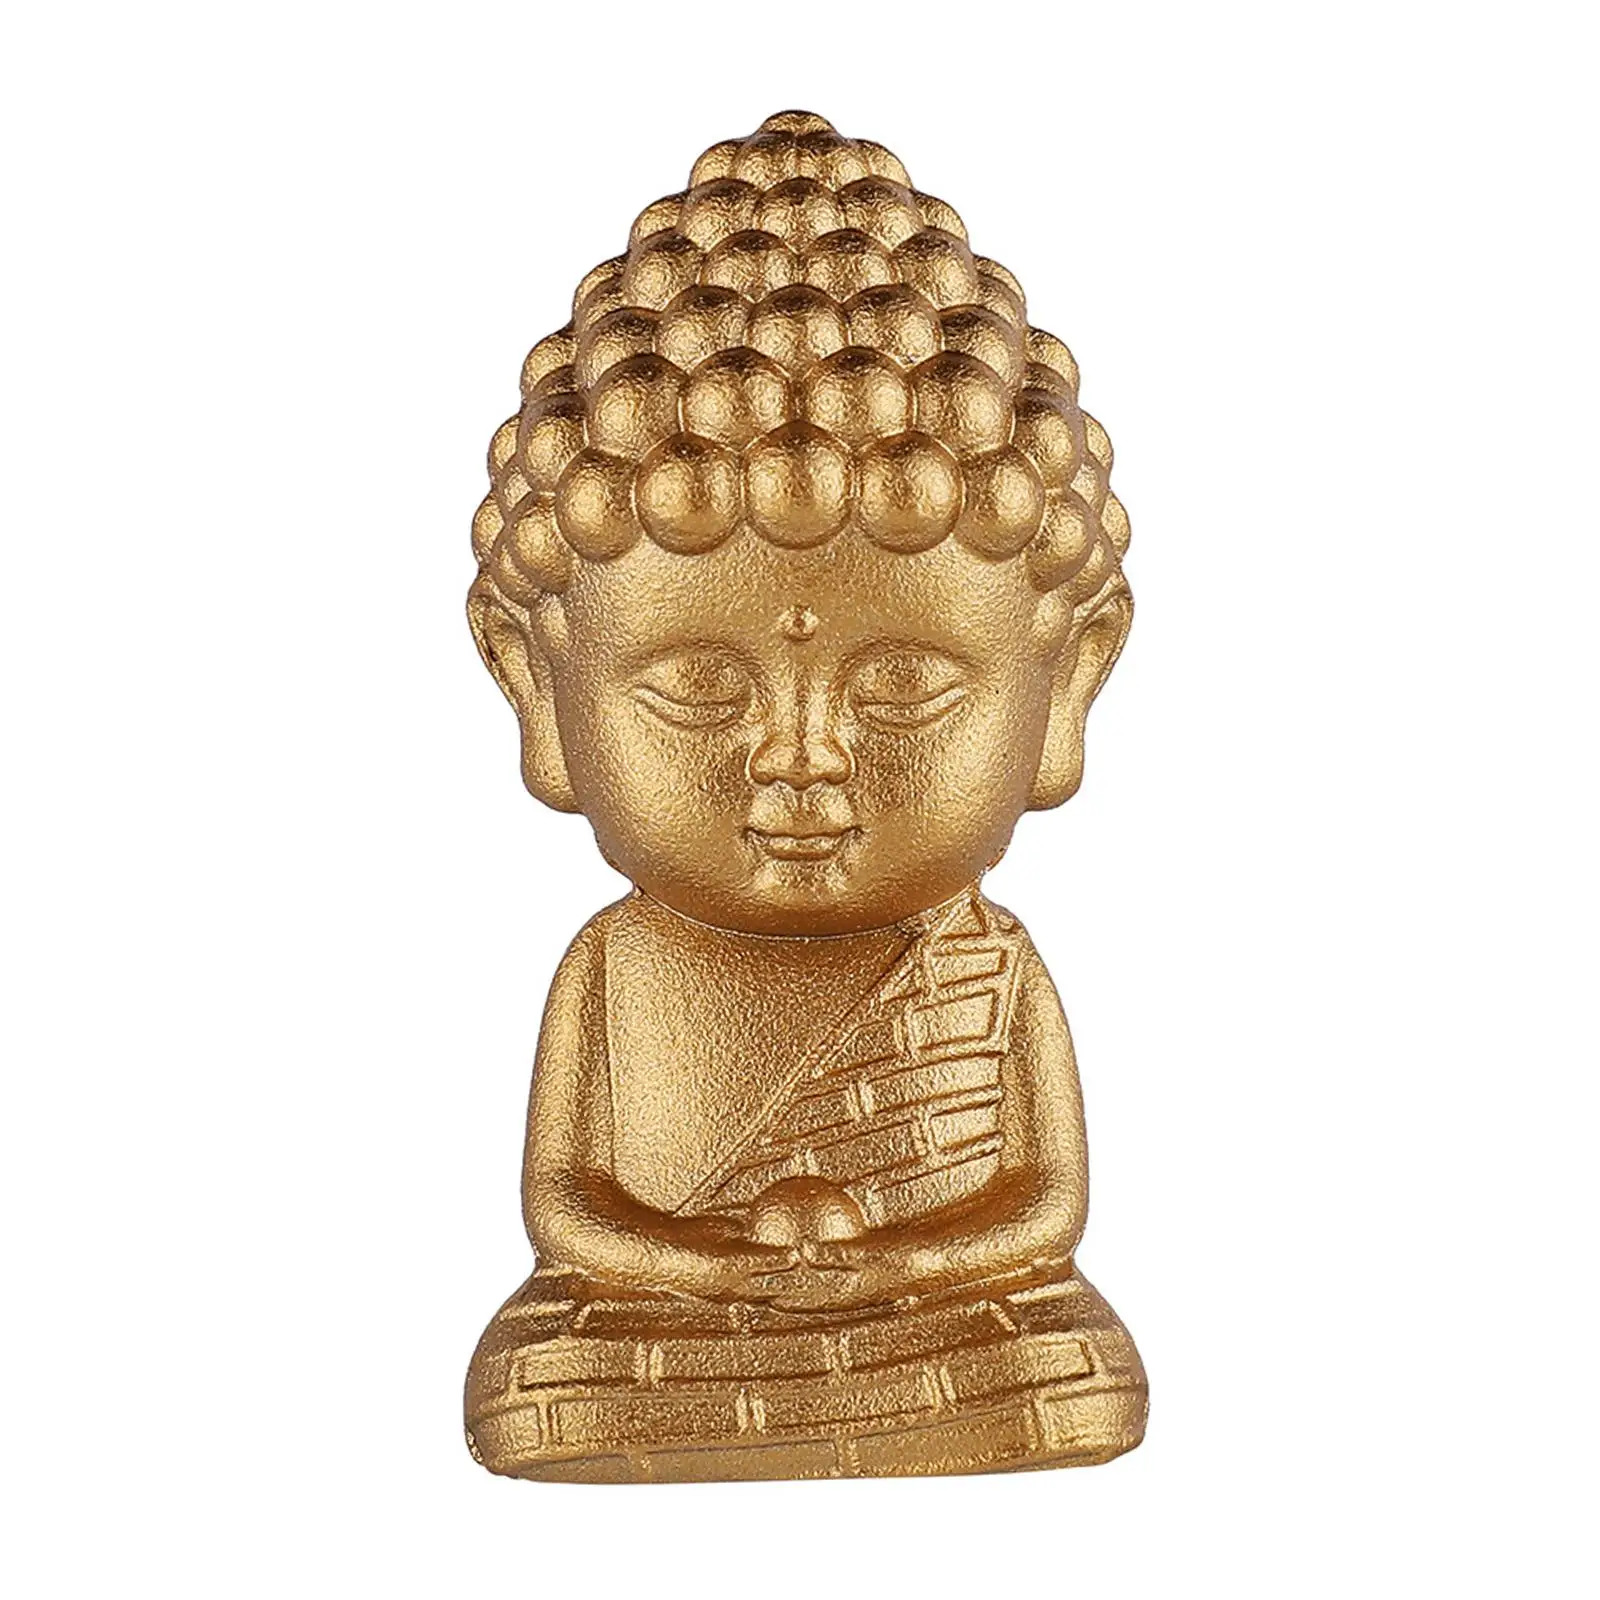 Miniature Buddha Statue Scene Layout Props Sculpture for Office Study Home Housewarming